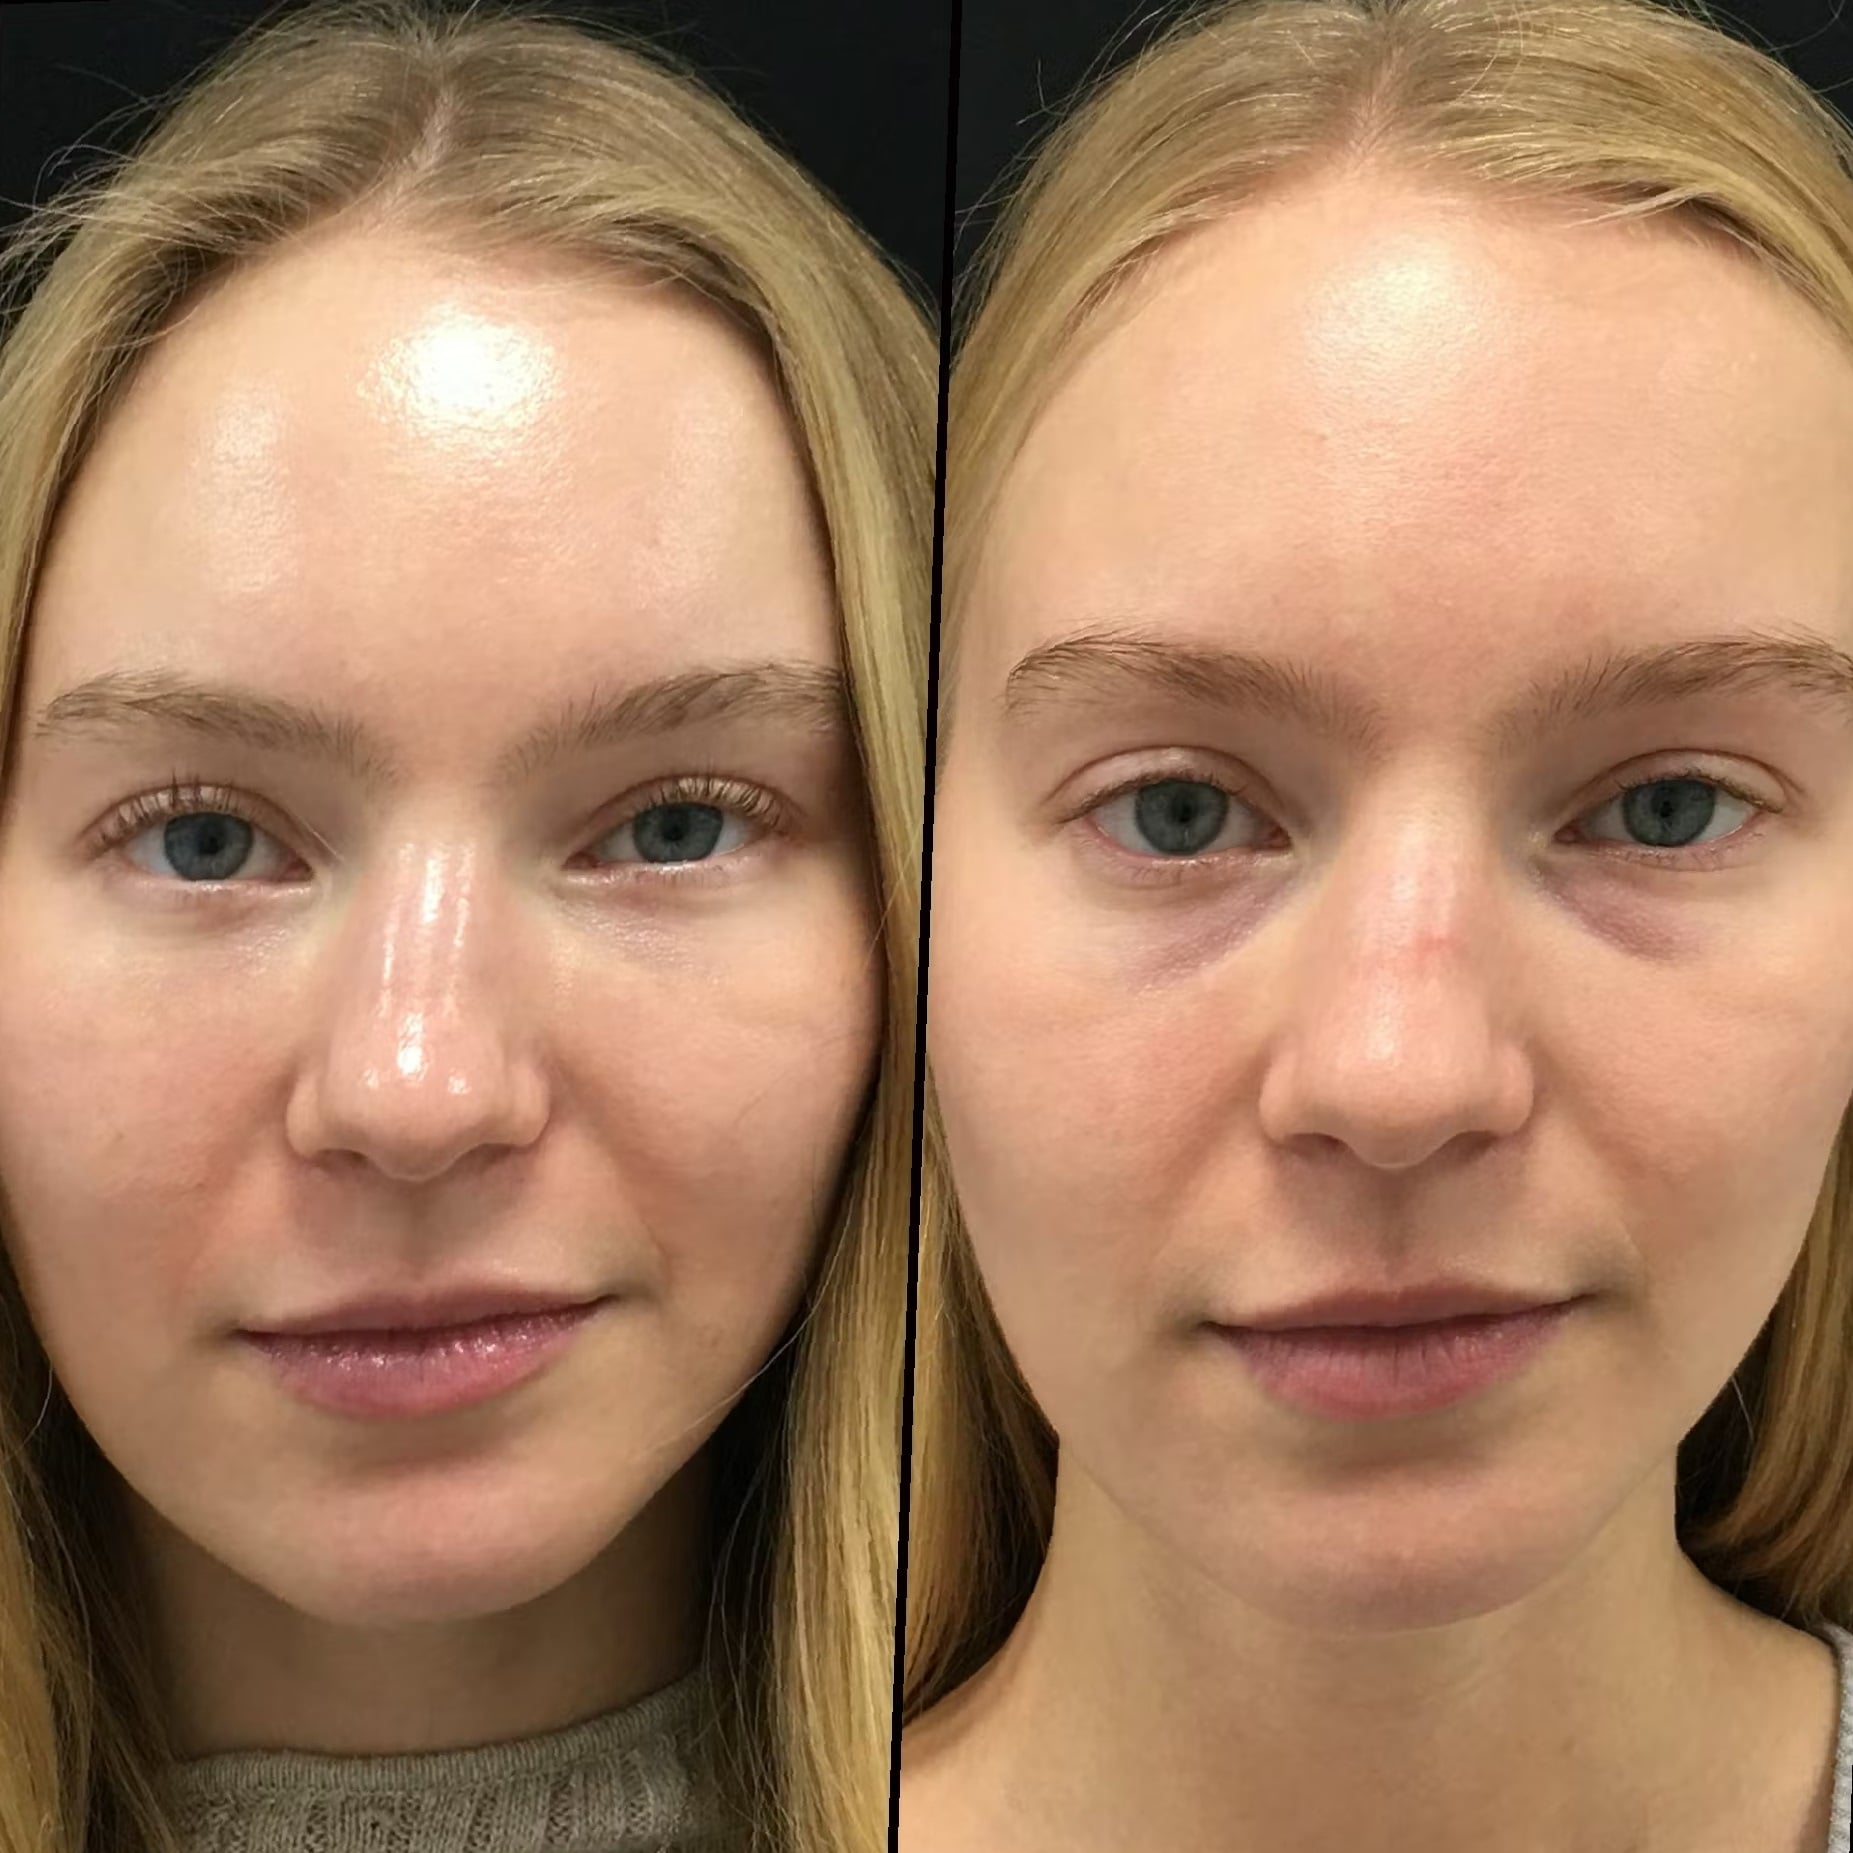 Blepharoplasty-Before-and-After-7